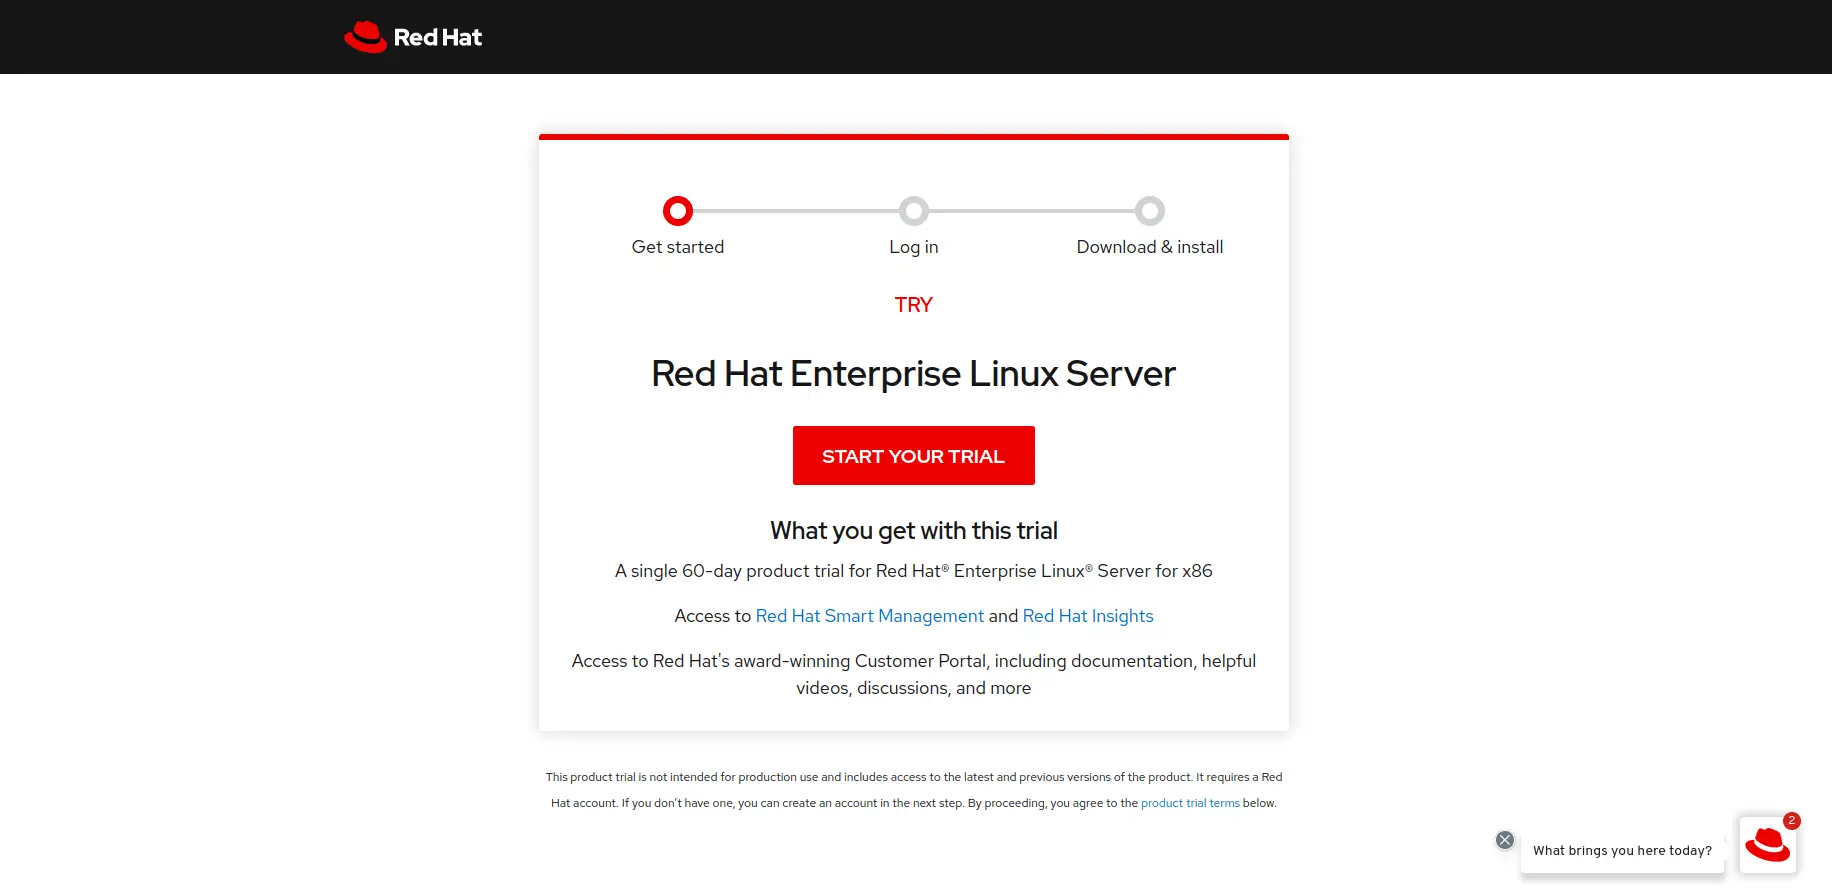 Redhat 60-day trial